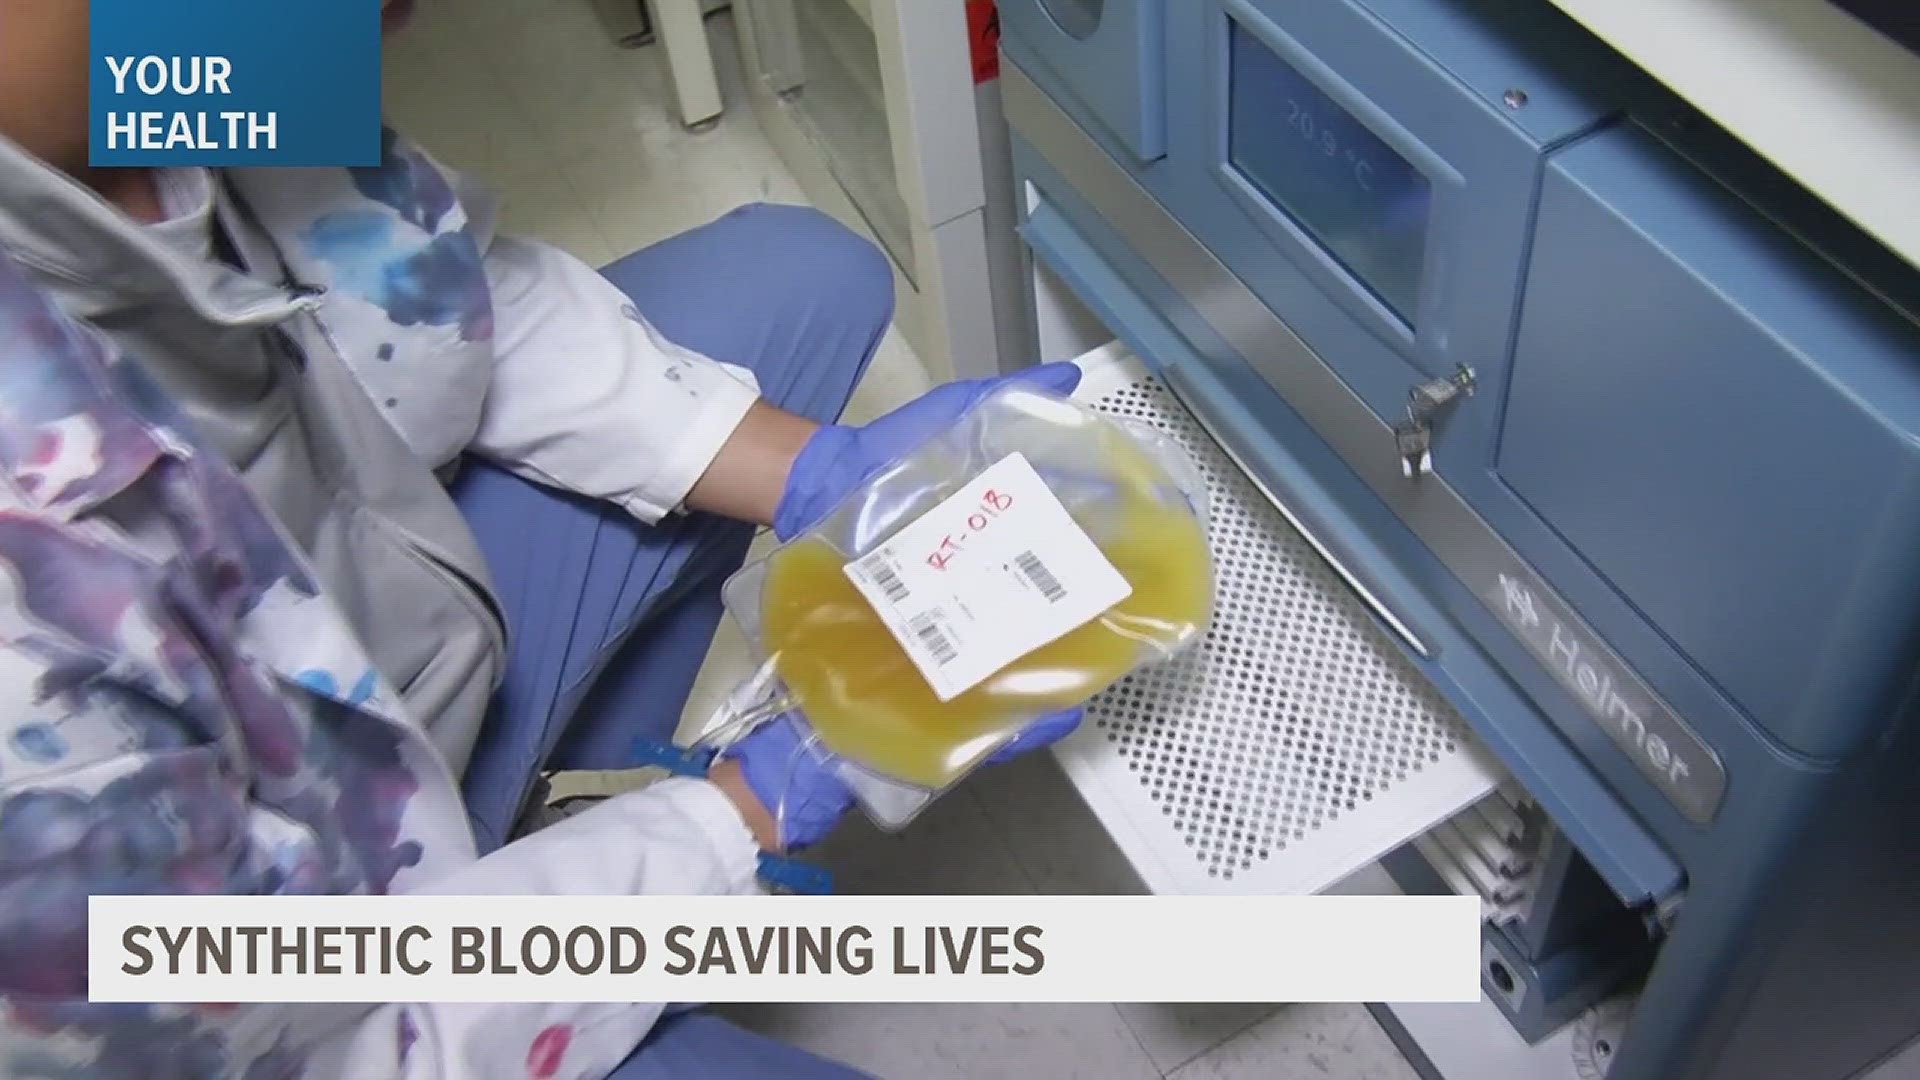 Having a blood supply is crucial in emergency situations, and to help mitigate the need for blood donors scientists are developing a synthetic alternative.